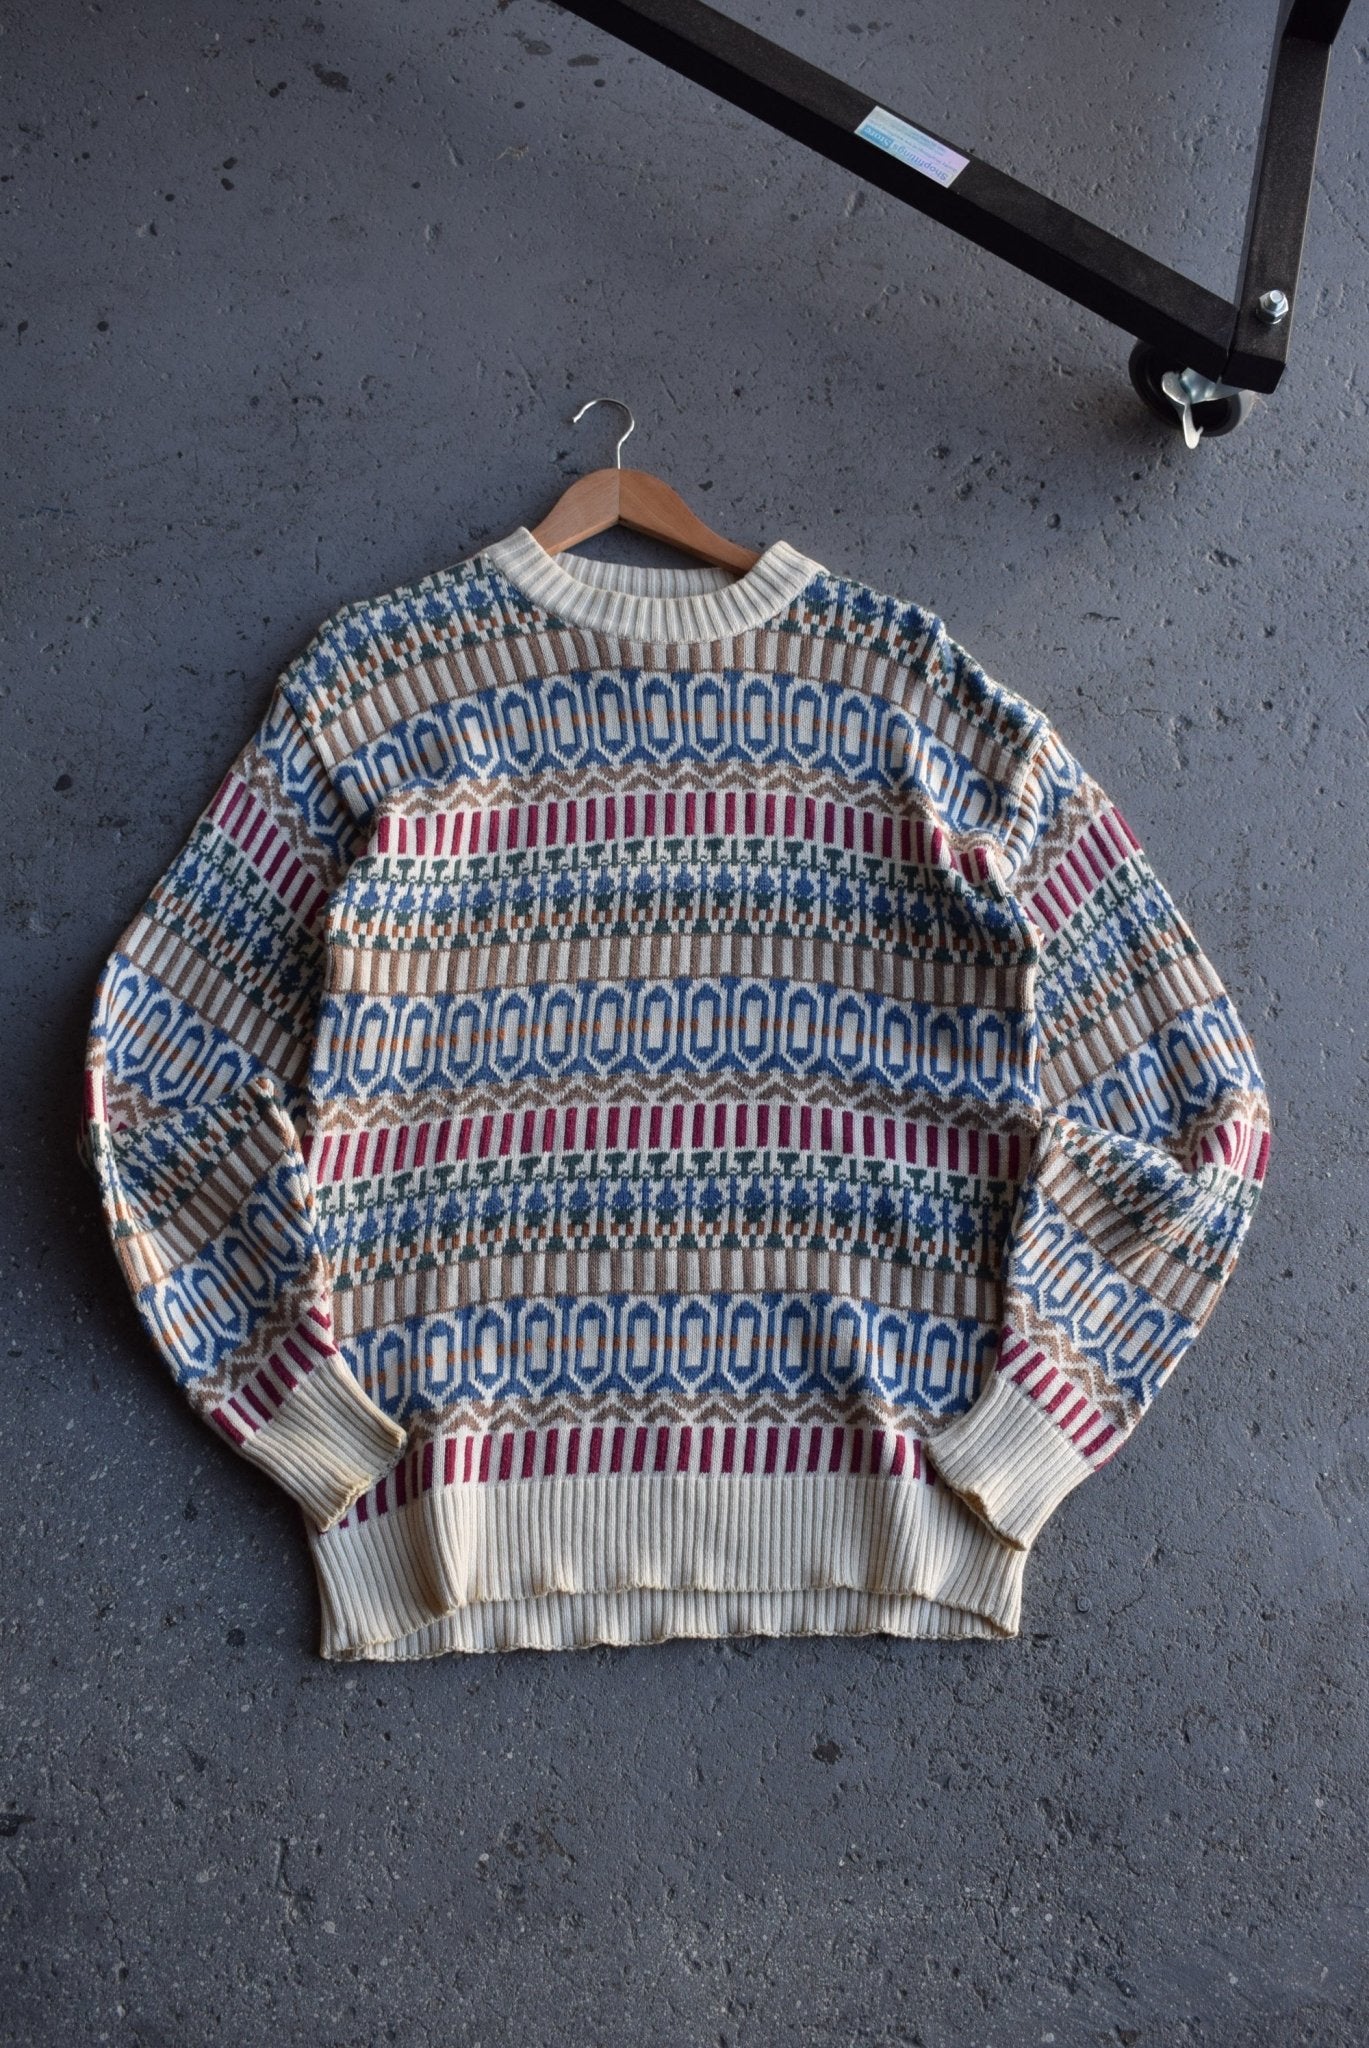 Vintage 90s 'Sears Roebuck' Knitted Sweater (M) - Retrospective Store